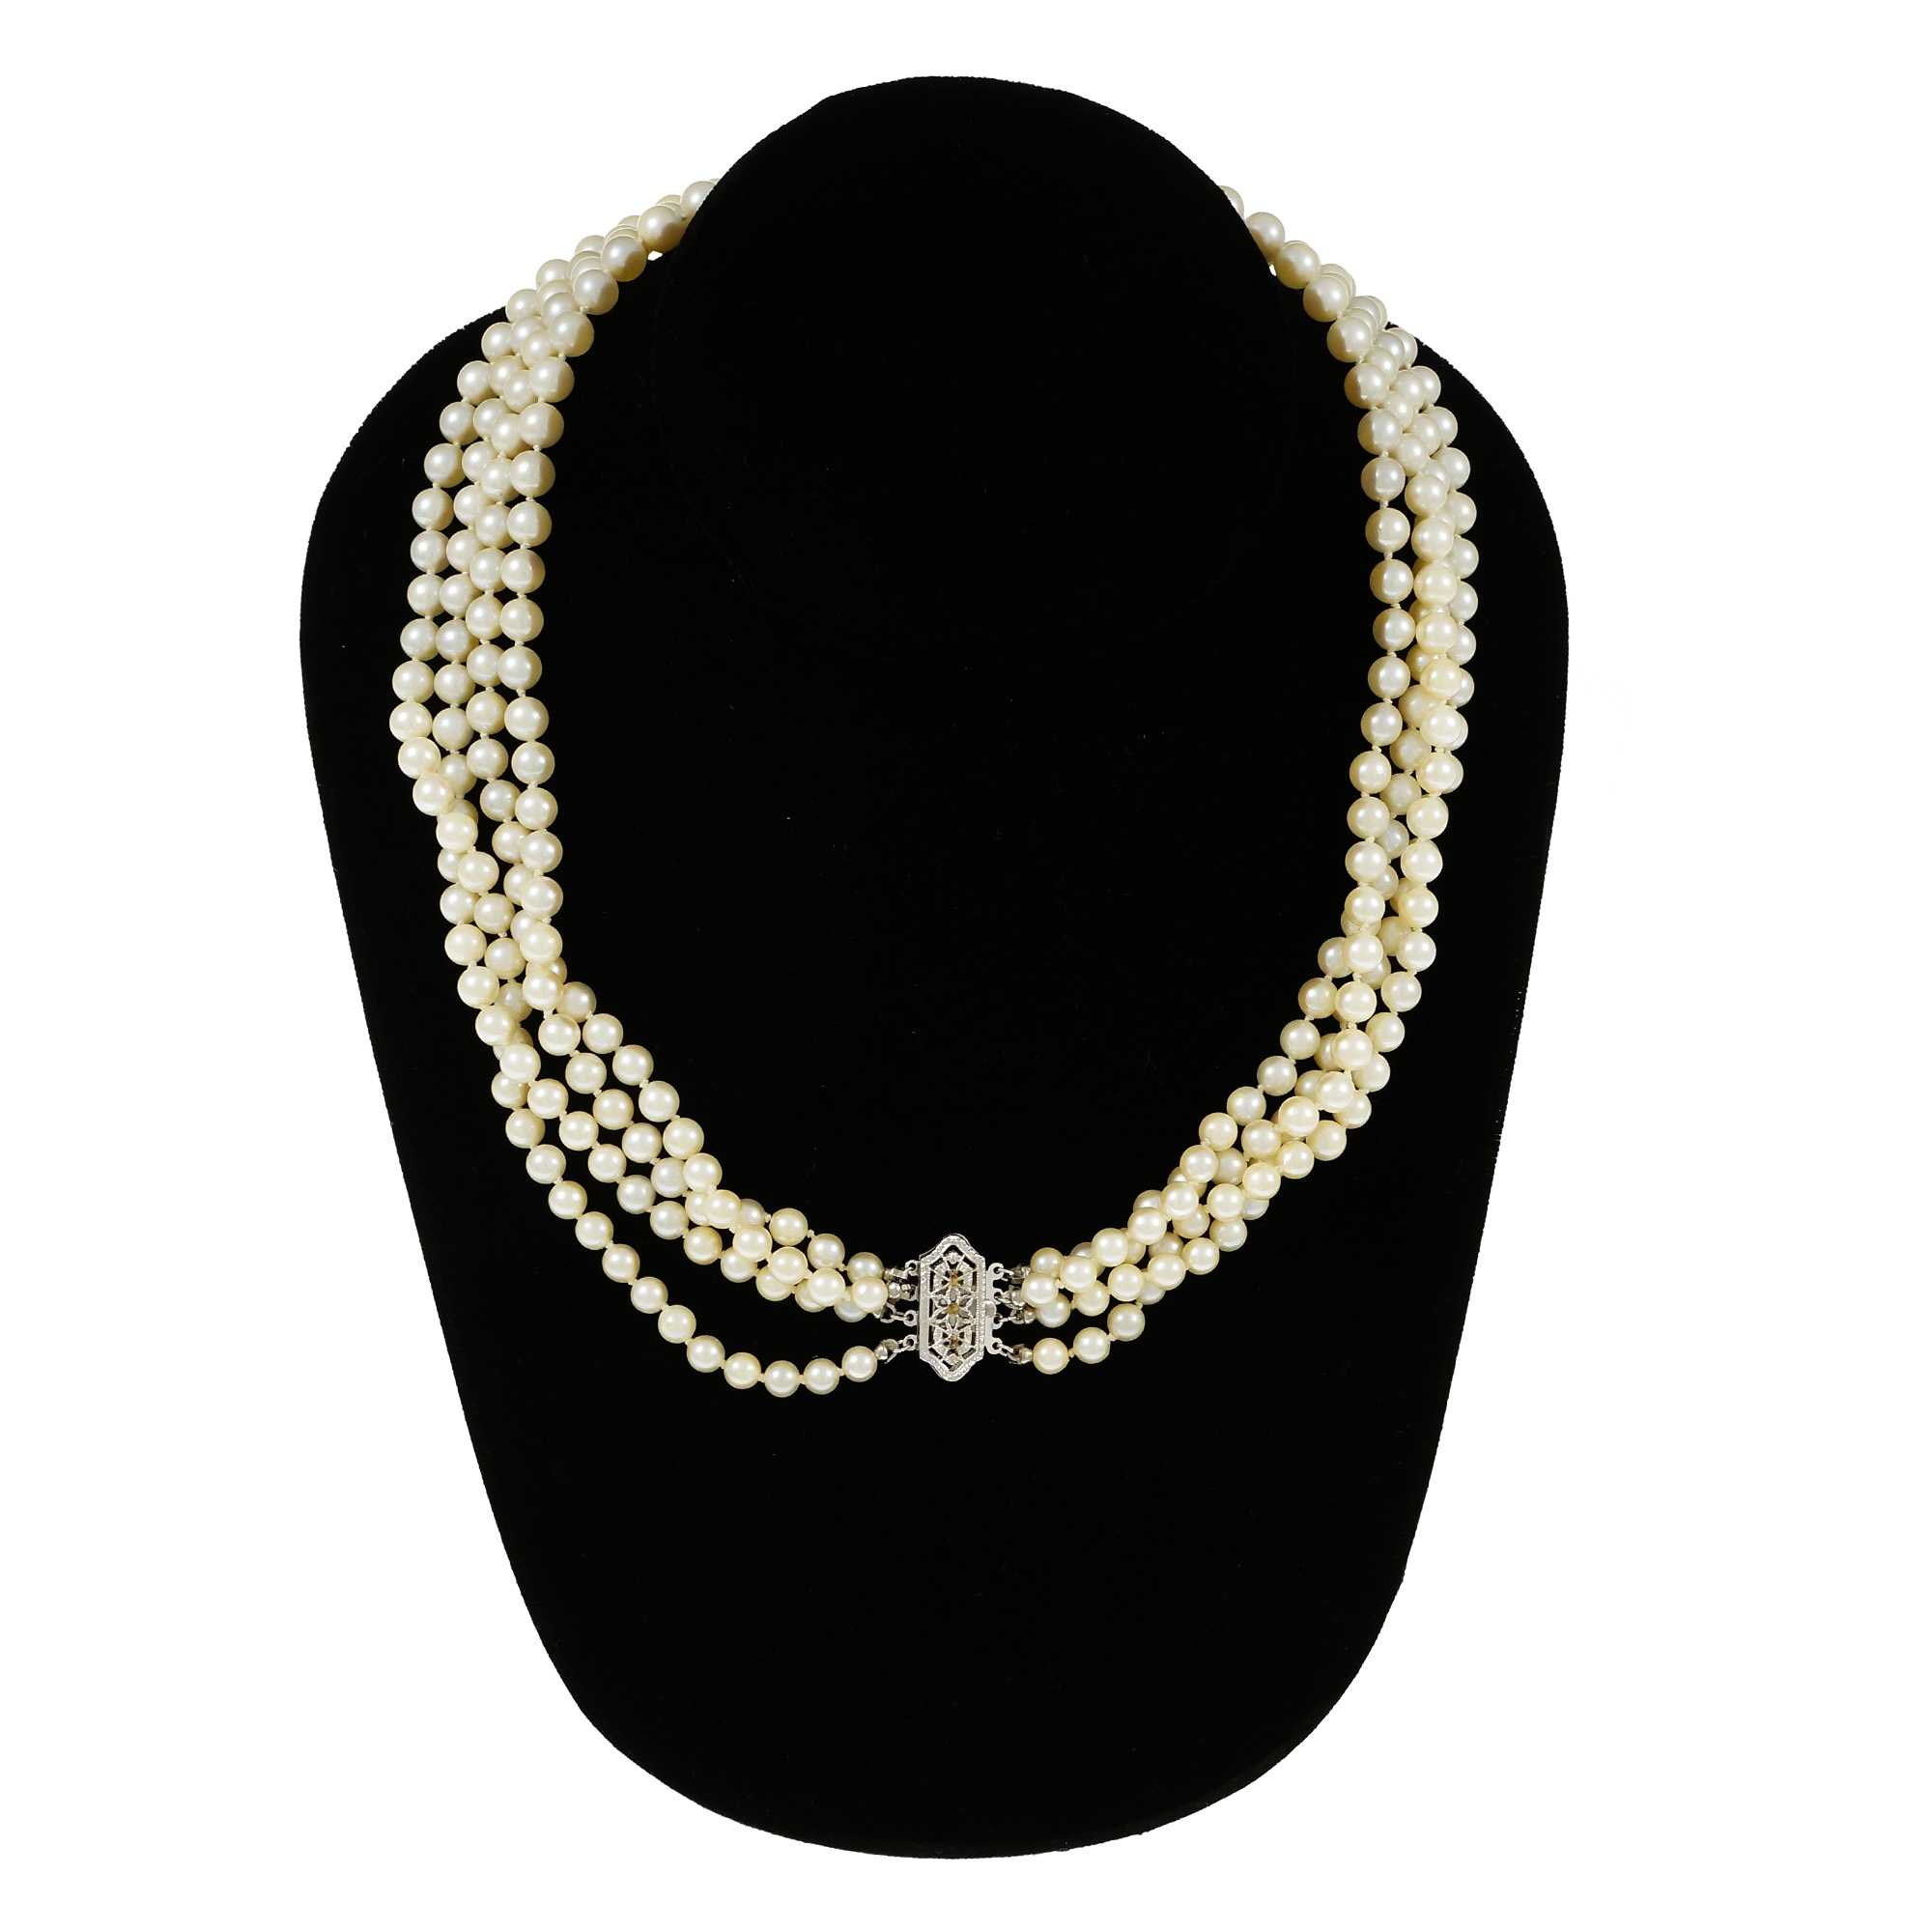 Vintage 1950 4 Strand Cultured Pearl Necklace Graduated 14k White Gold ...